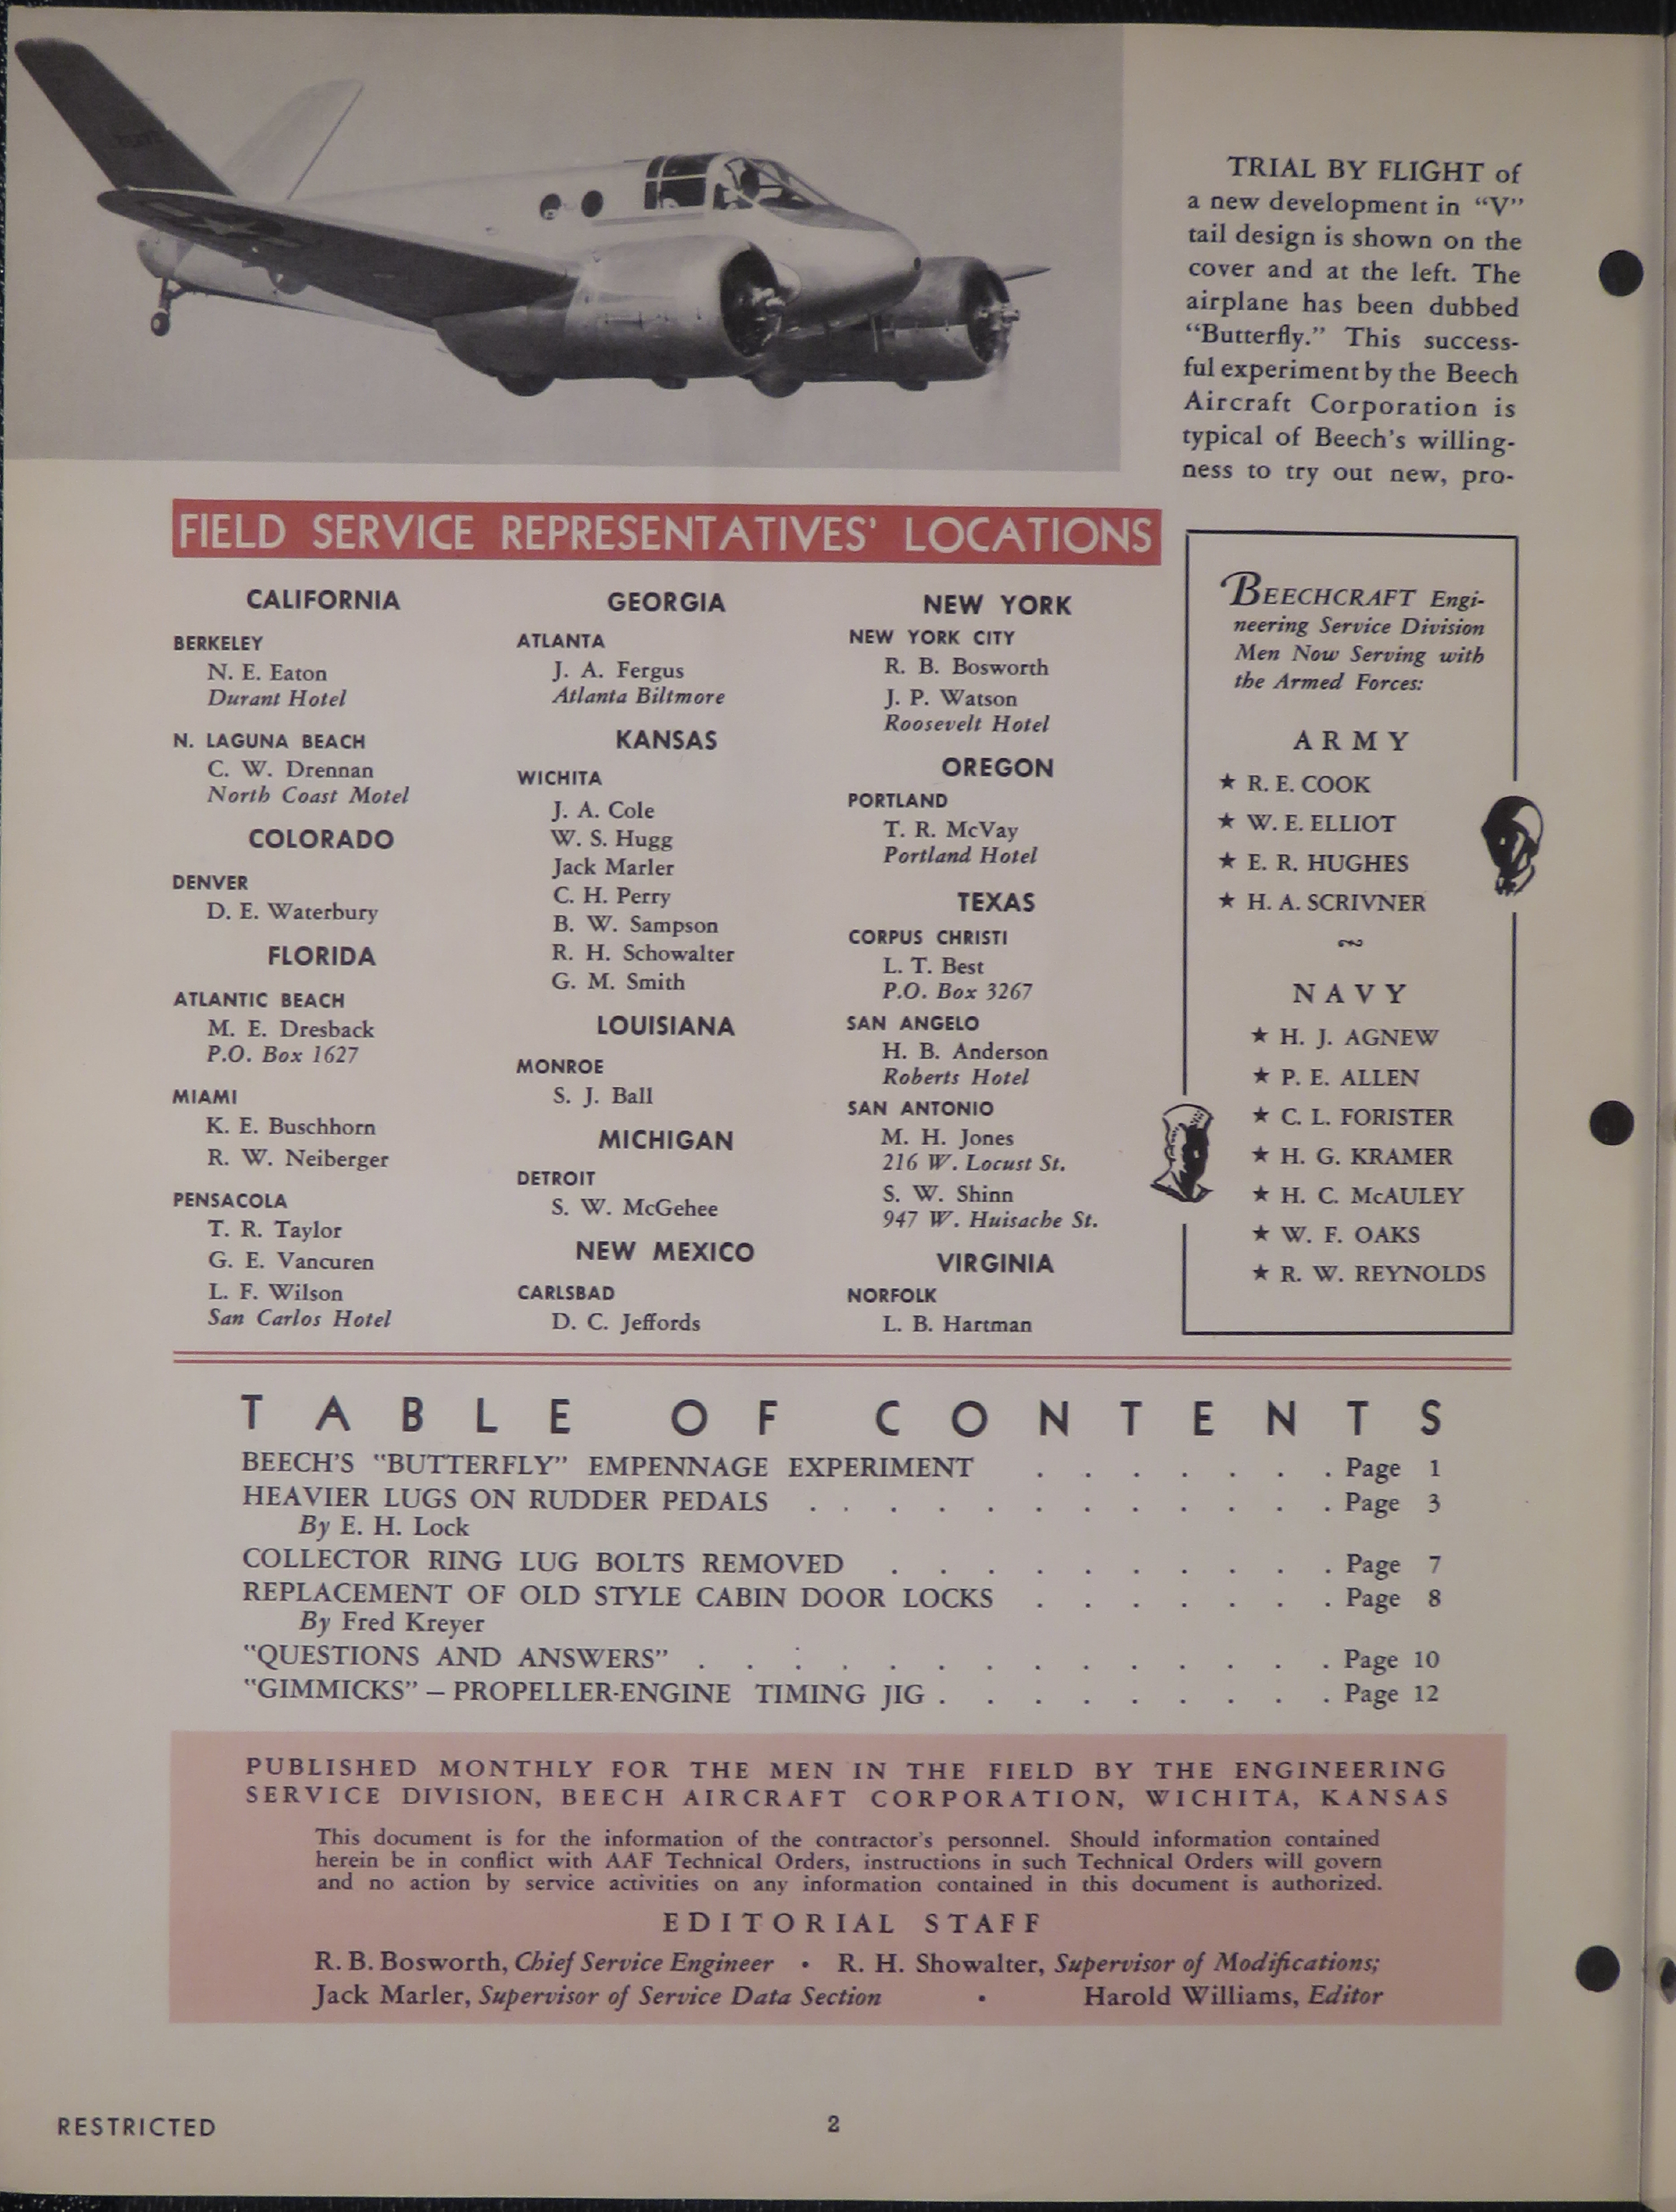 Sample page 2 from AirCorps Library document: Vol. II, No. 15 - Beechcraft Engineering Service